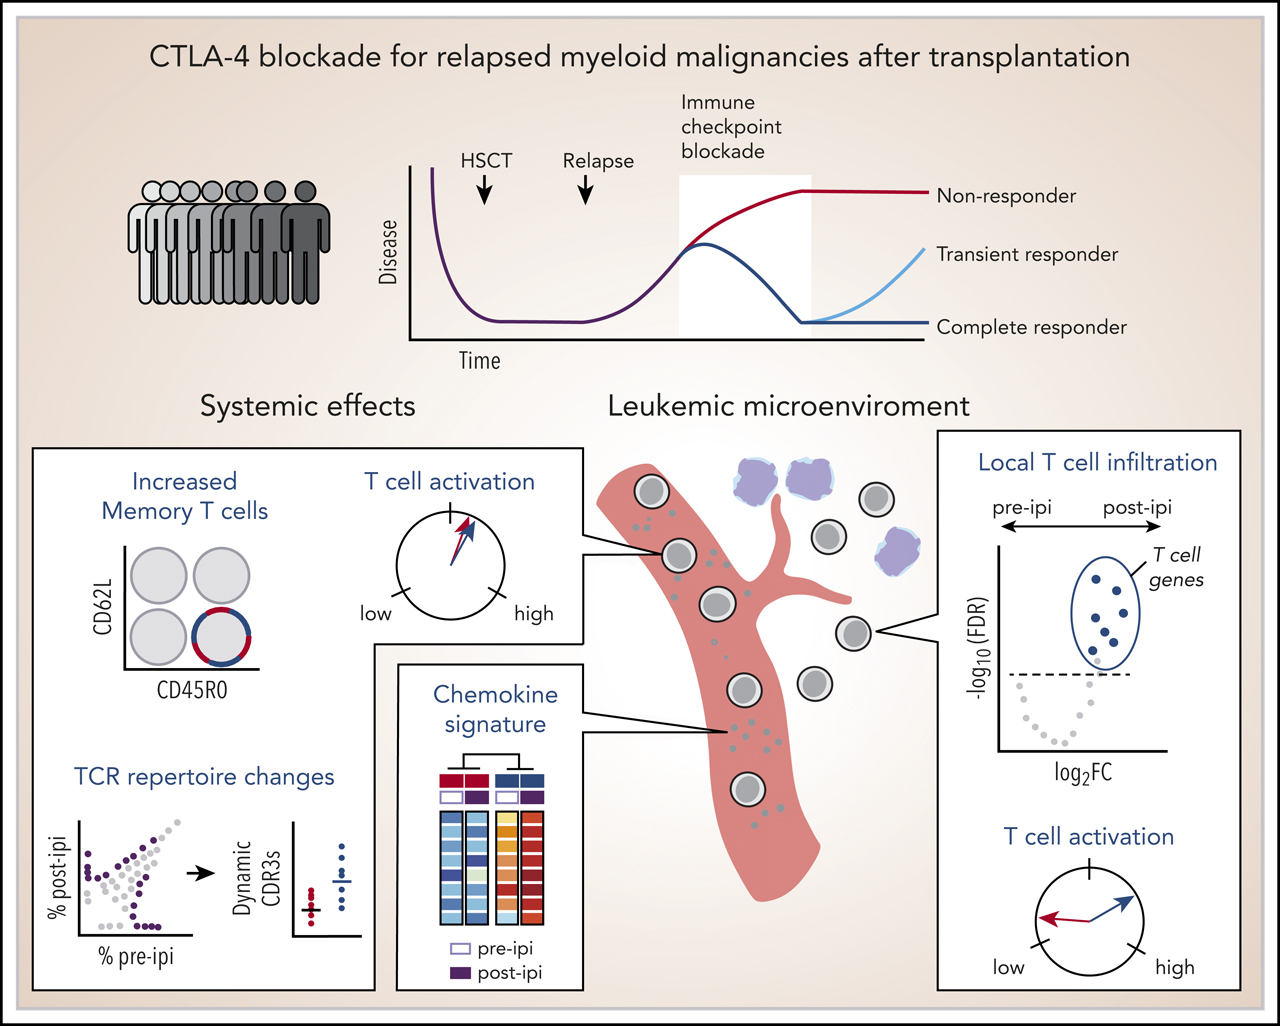 Molecular and cellular features of CTLA-4 blockade for relapsed myeloid malignancies after transplantation